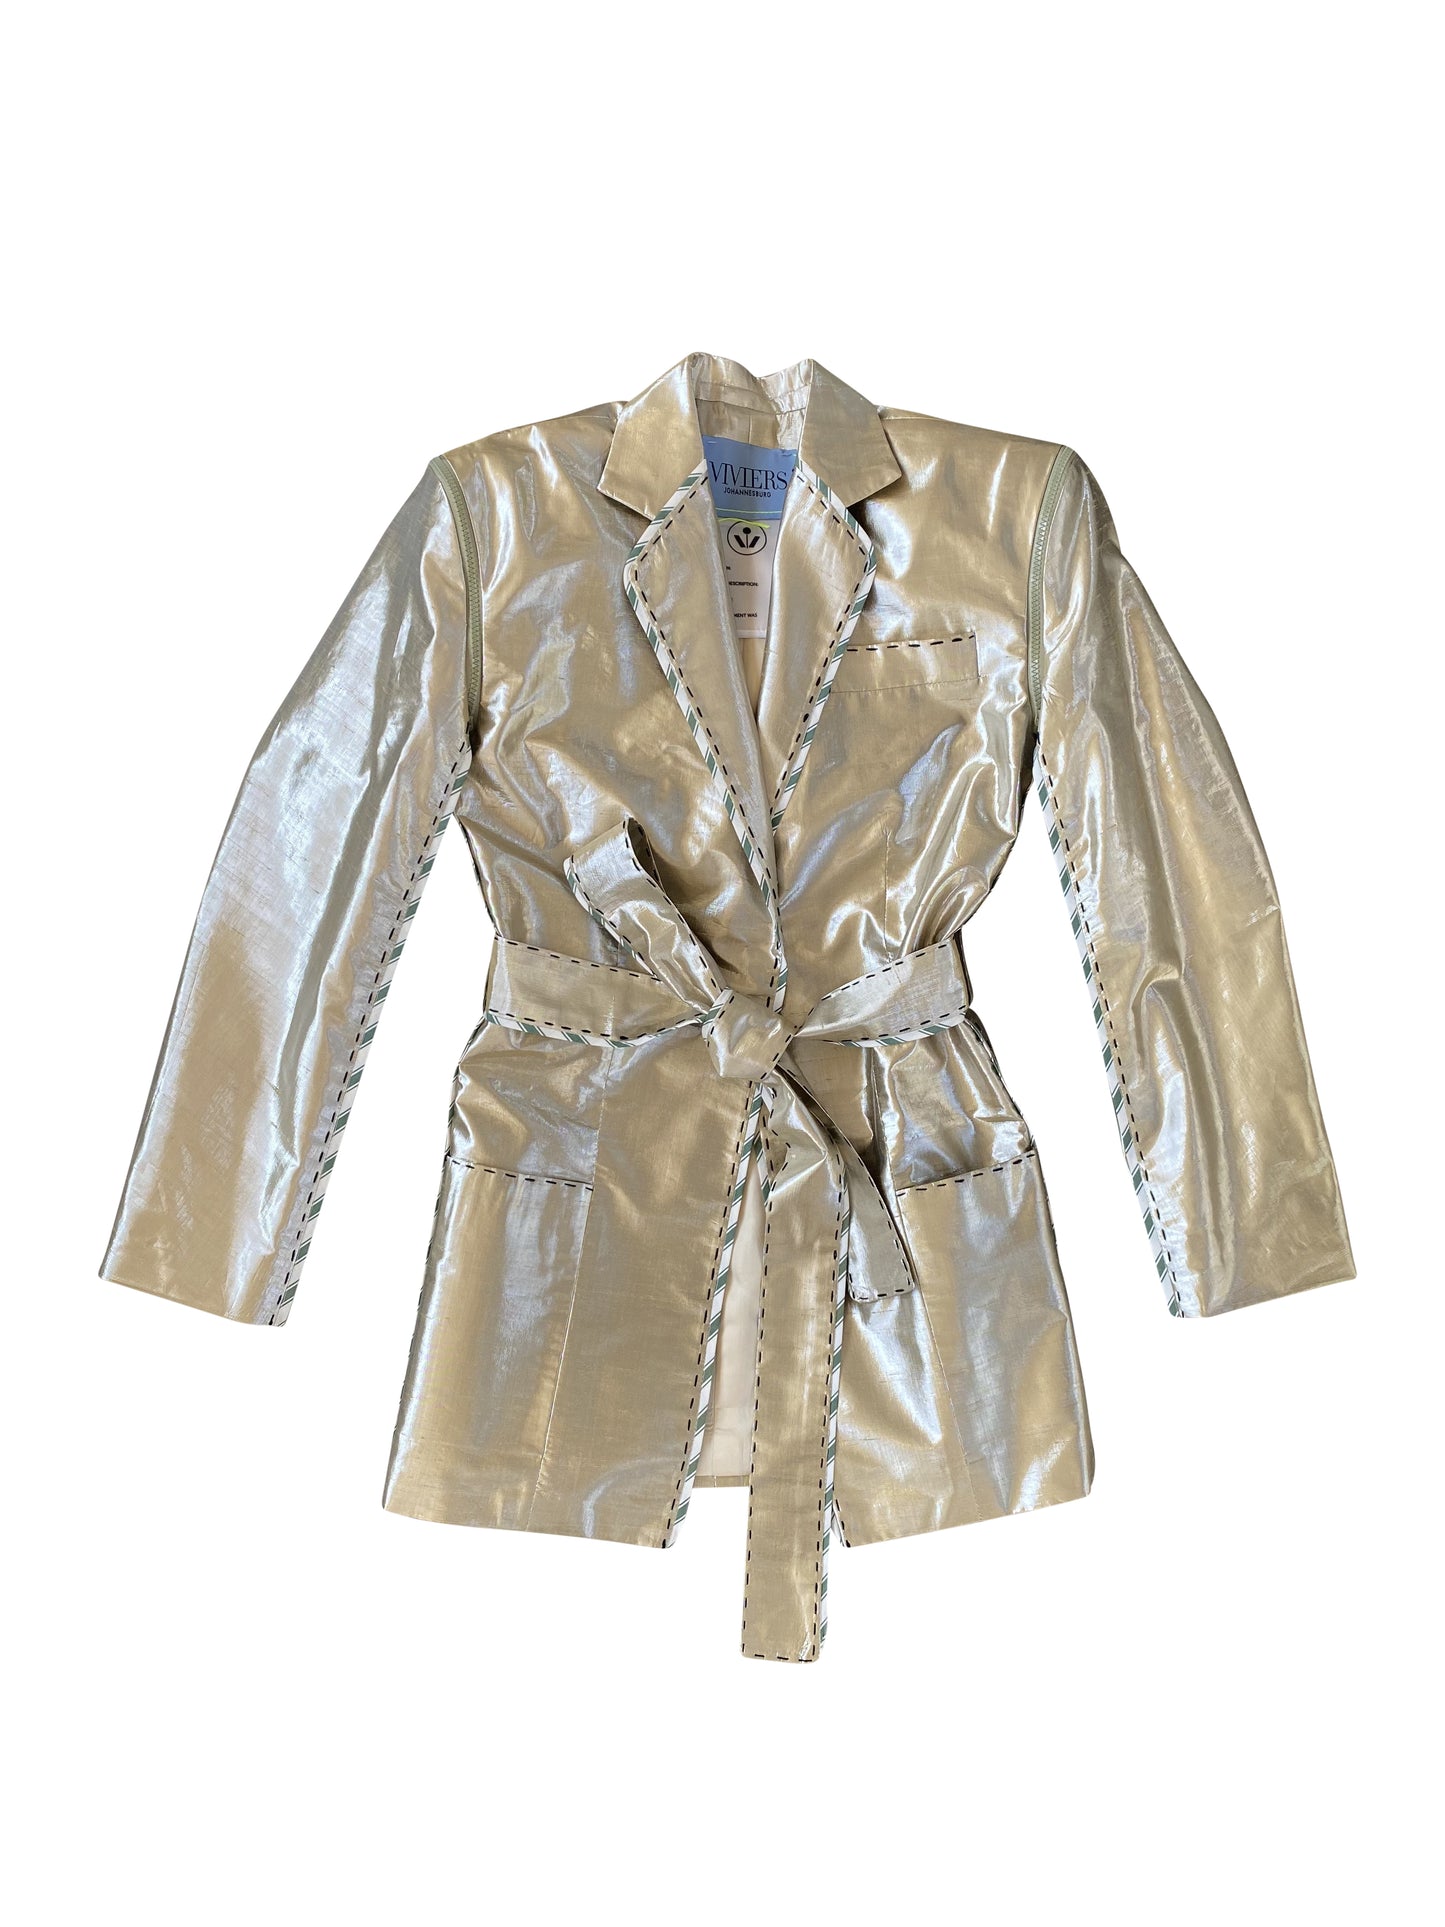 Radiating Jewel Tailored Jacket with Detachable Sleeves in Silk Lamé